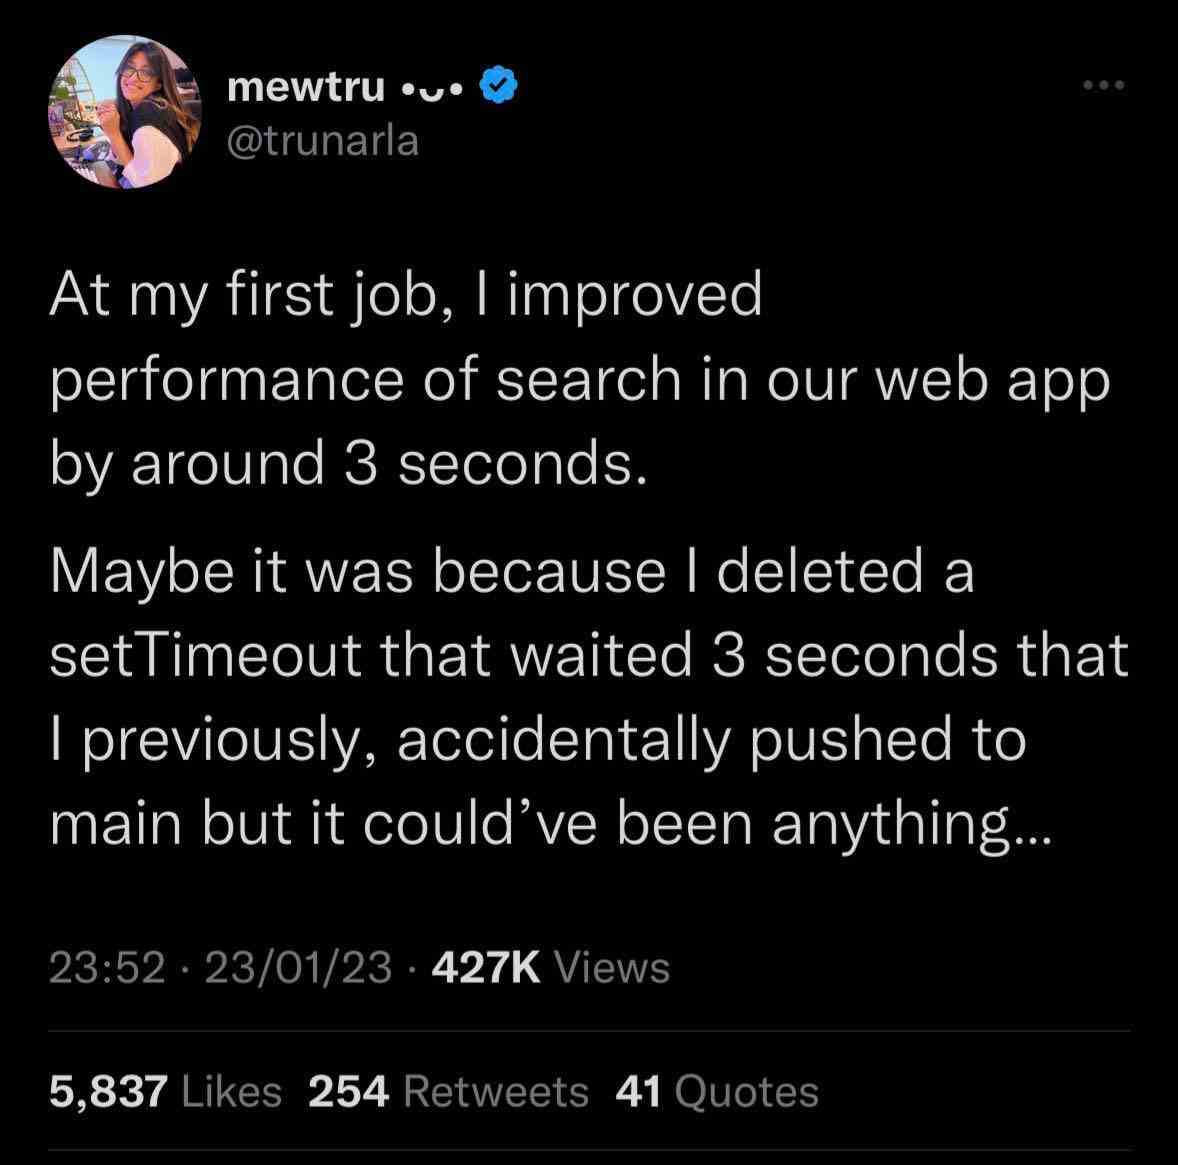 At my first job, I improved performance of search in our web app by around 3 seconds